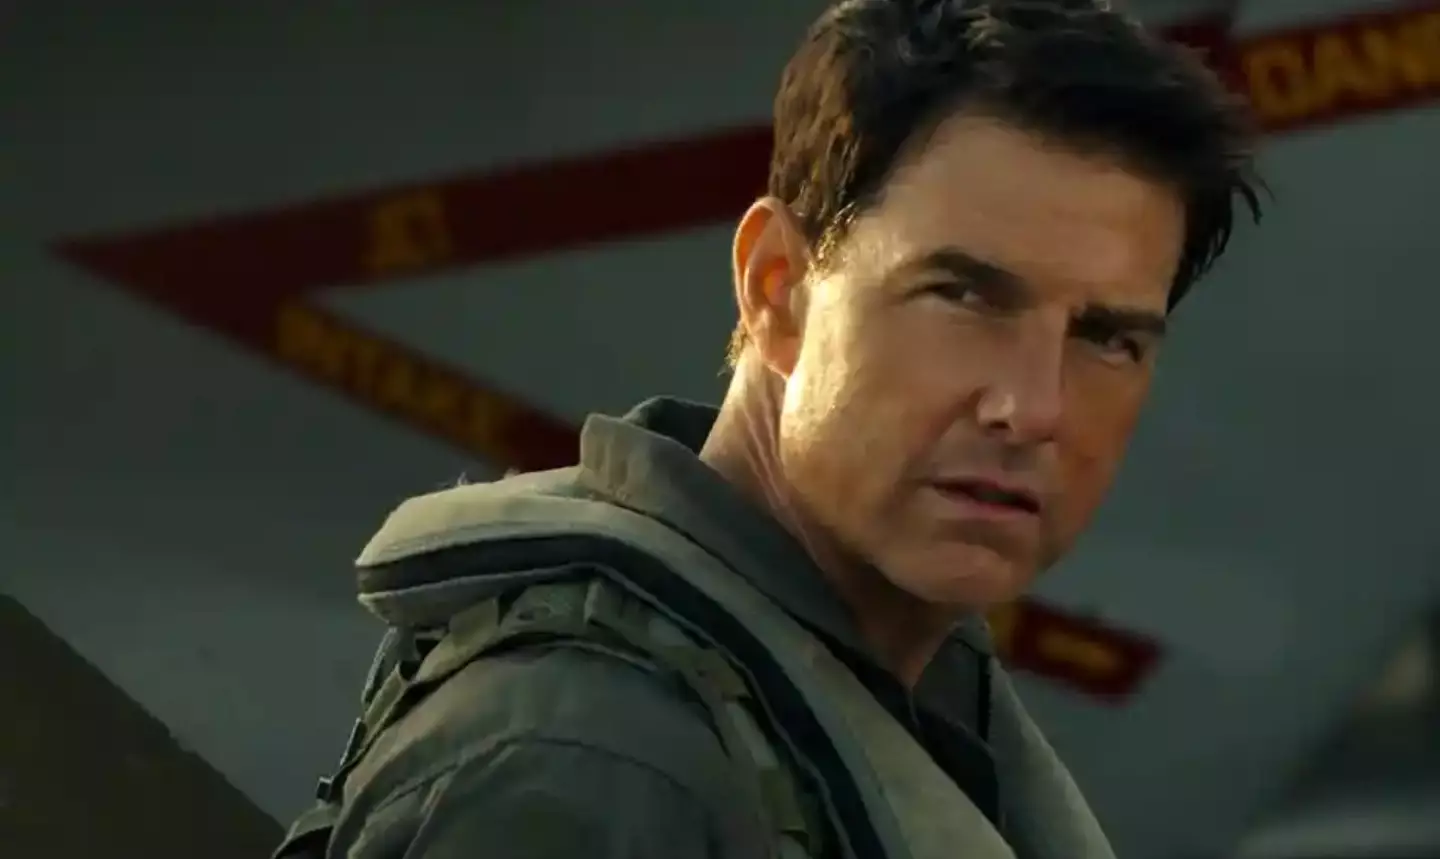 The actor appears in Top Gun: Maverick out on May 27.